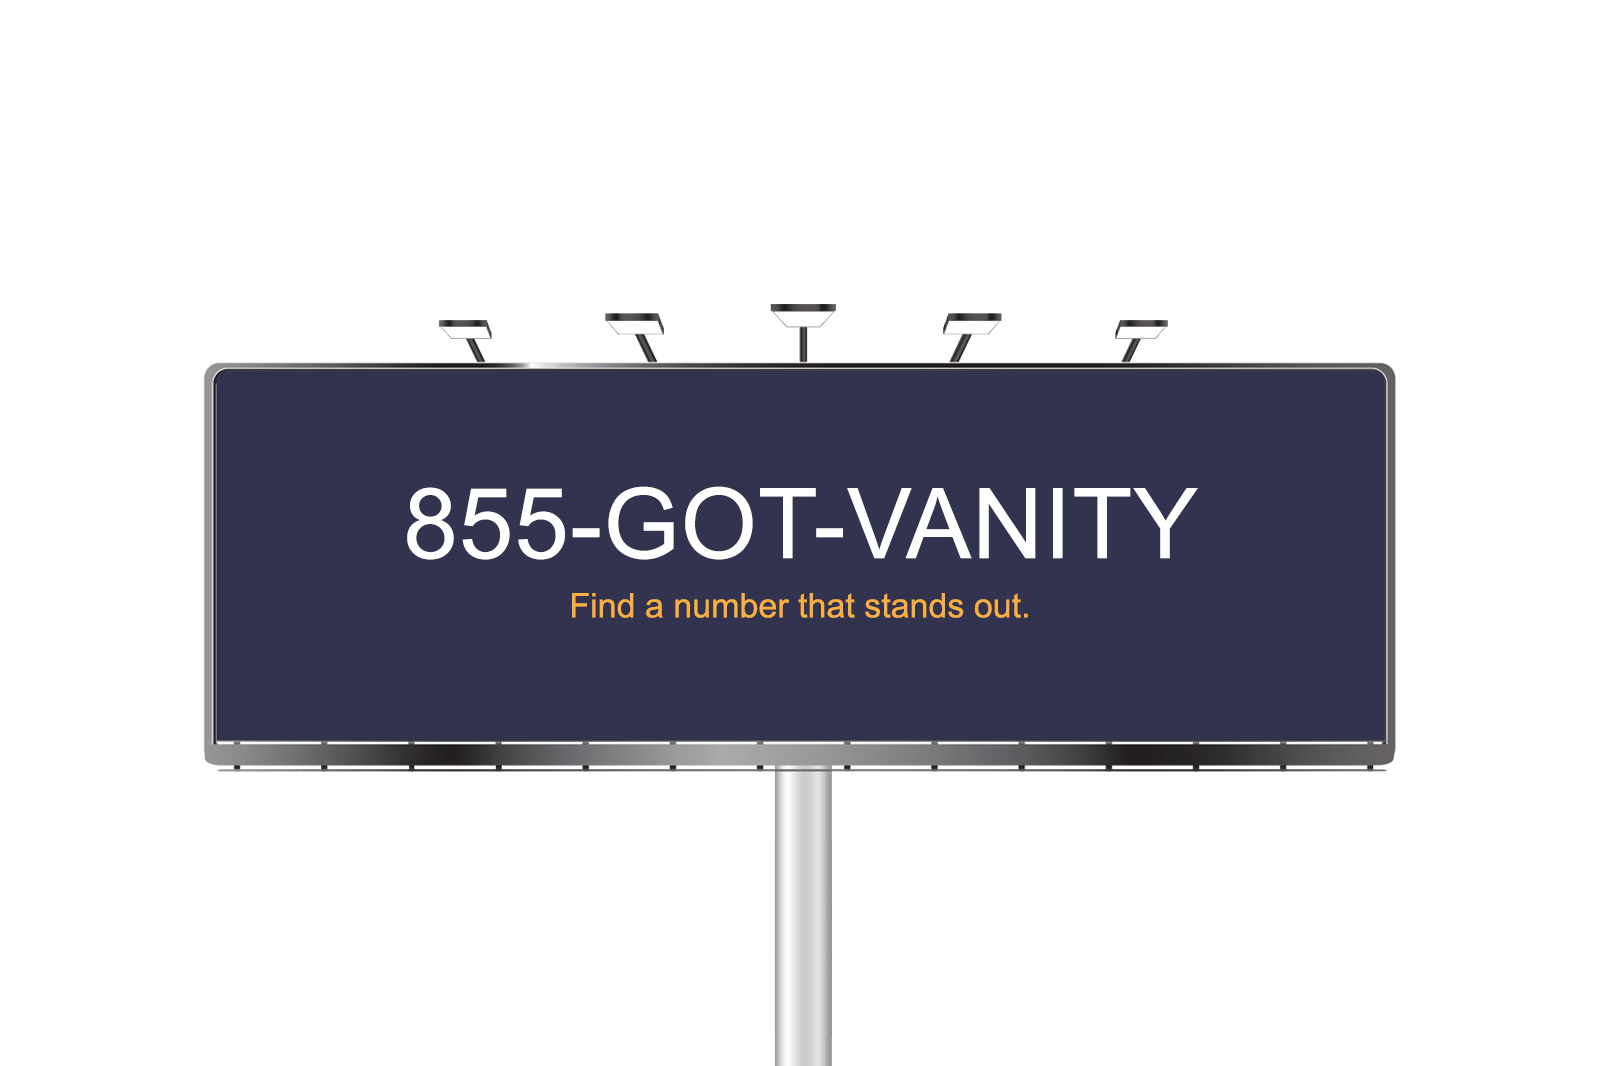 Get a vanity phone number for your business